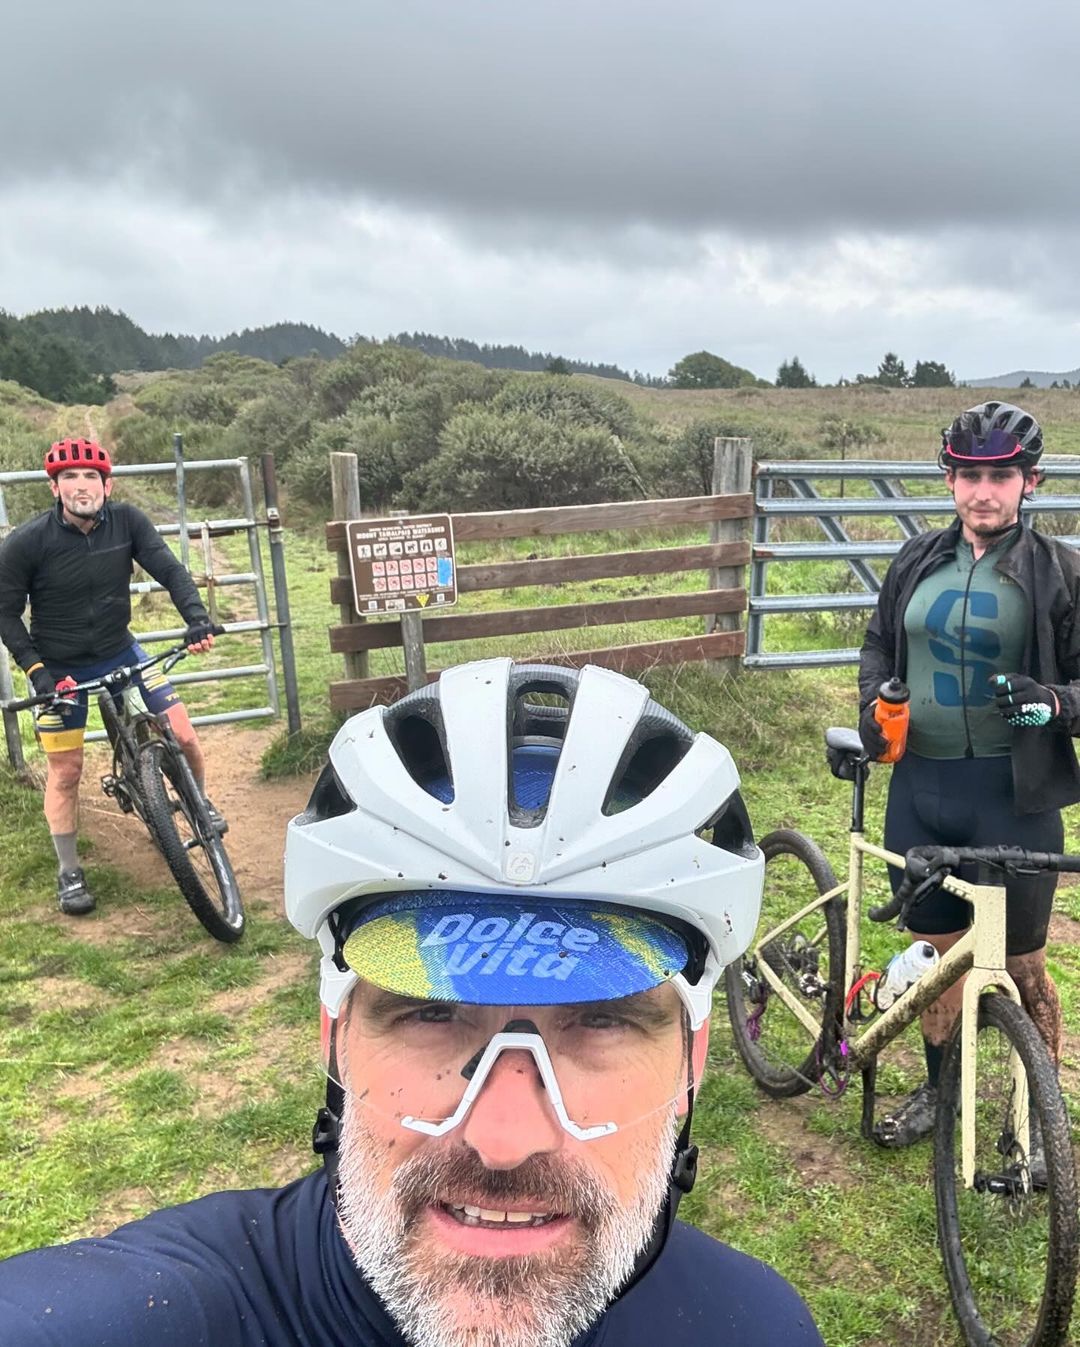 Fun day out on the MTBs! Who’s afraid of a little rain and wind? Let’s go 2024! 

@sportful @sfitalianathleticclub @equatorcoffees @poggio_labs @achieveptc @tripsforkidsmarin @sage.realestategroup @marinservicecourse @jkbrkb #themenkegeoup #onewealthadvisors